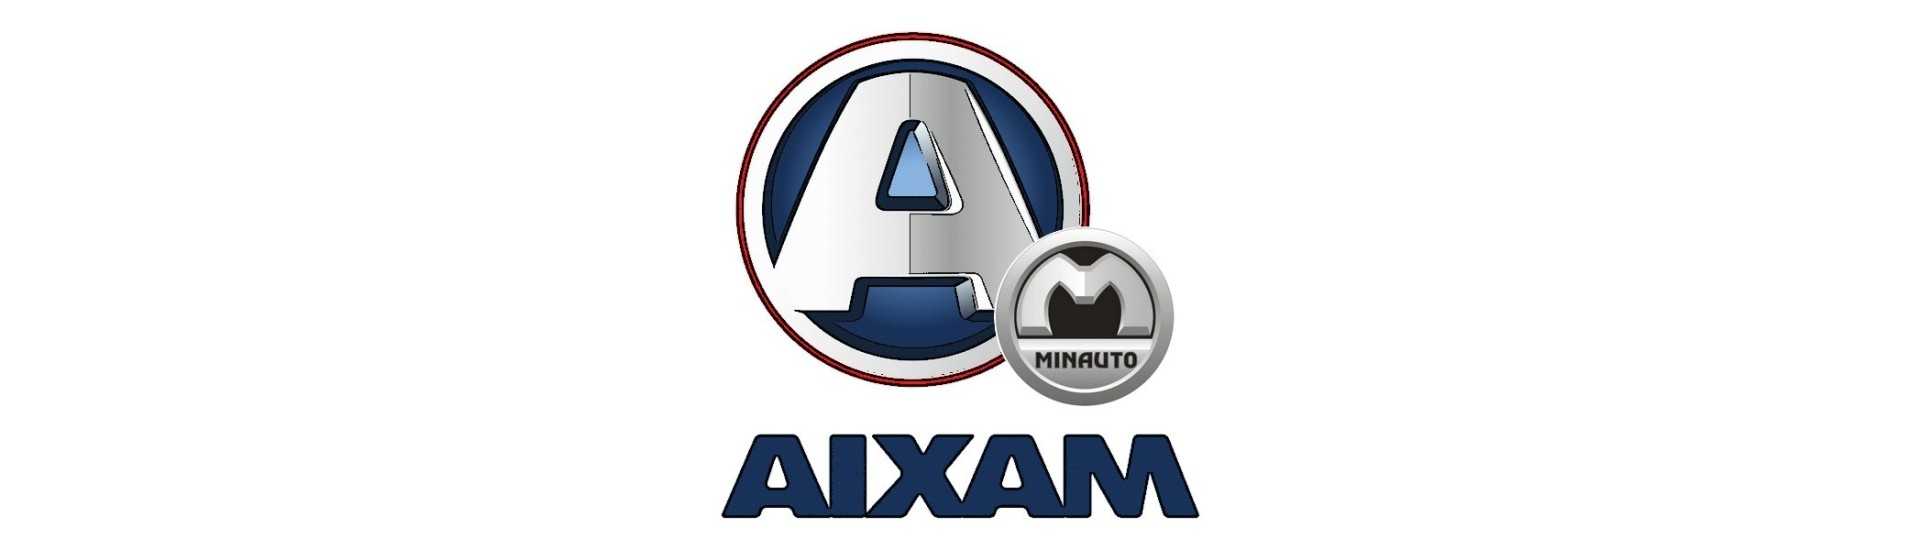 Central console at best price car without permit Aixam Minauto